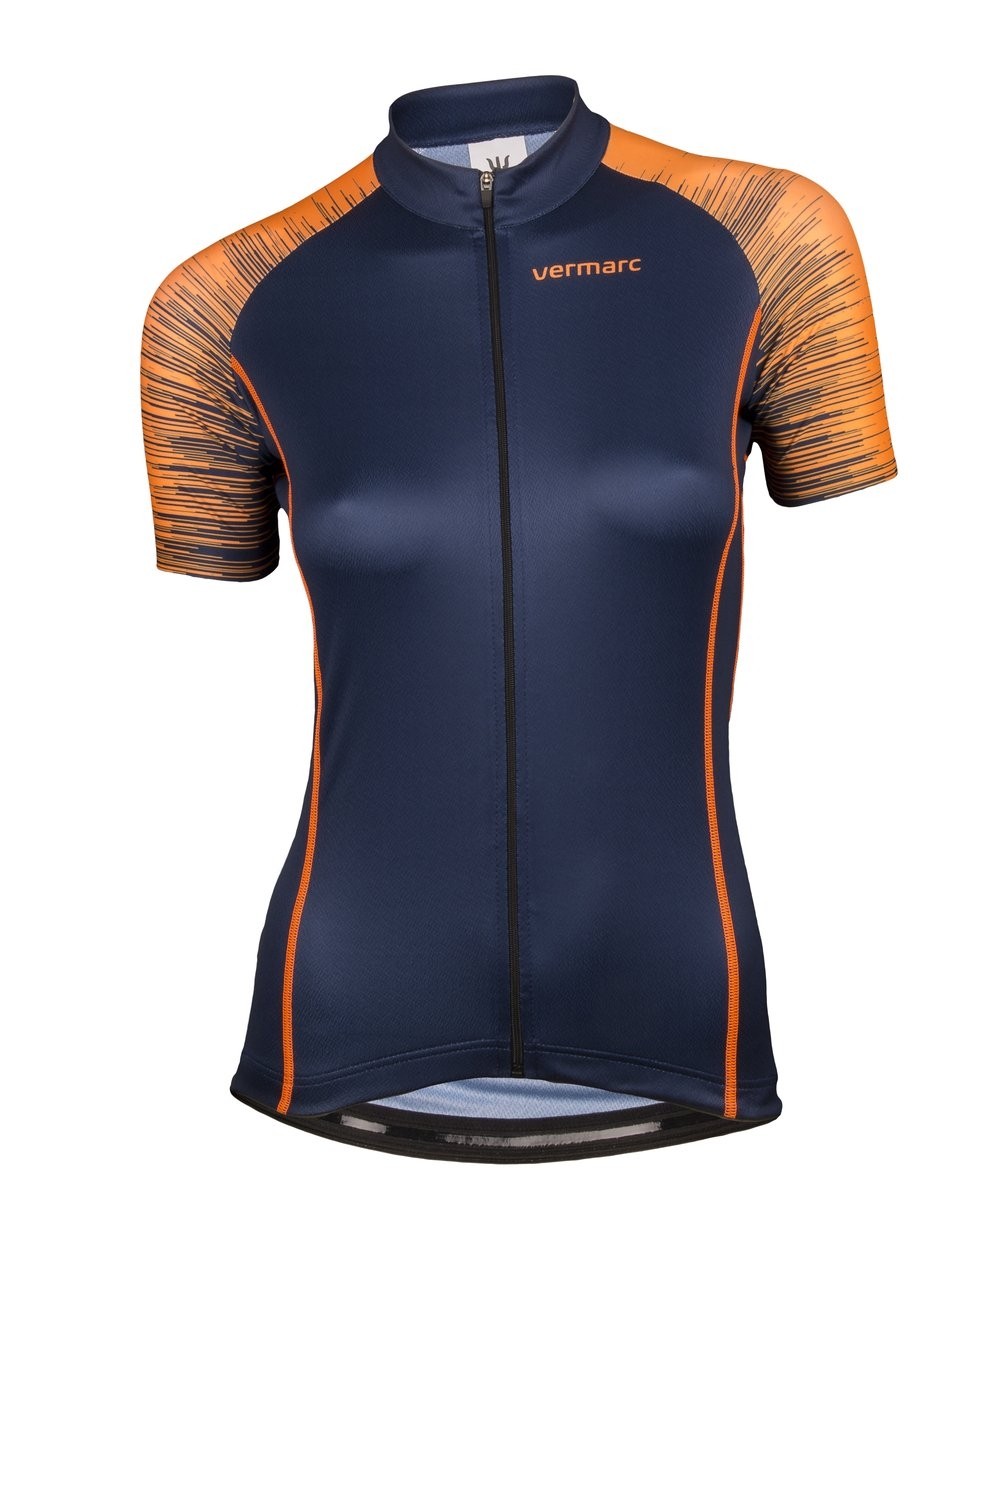 Vermarc seiso sp.l aero lady cycling jersey short sleeves navy blue orange fluo